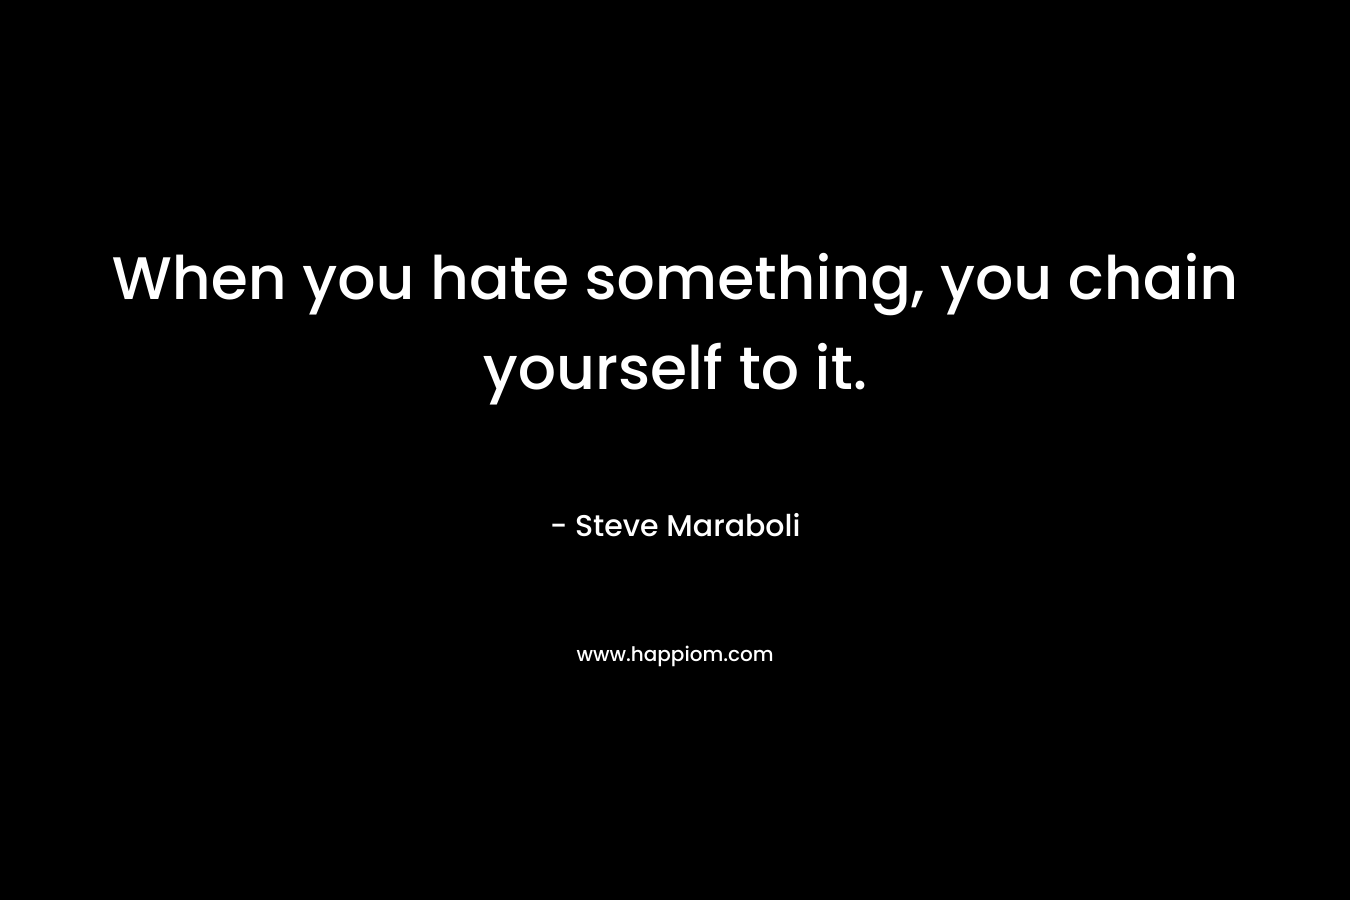 When you hate something, you chain yourself to it. – Steve Maraboli